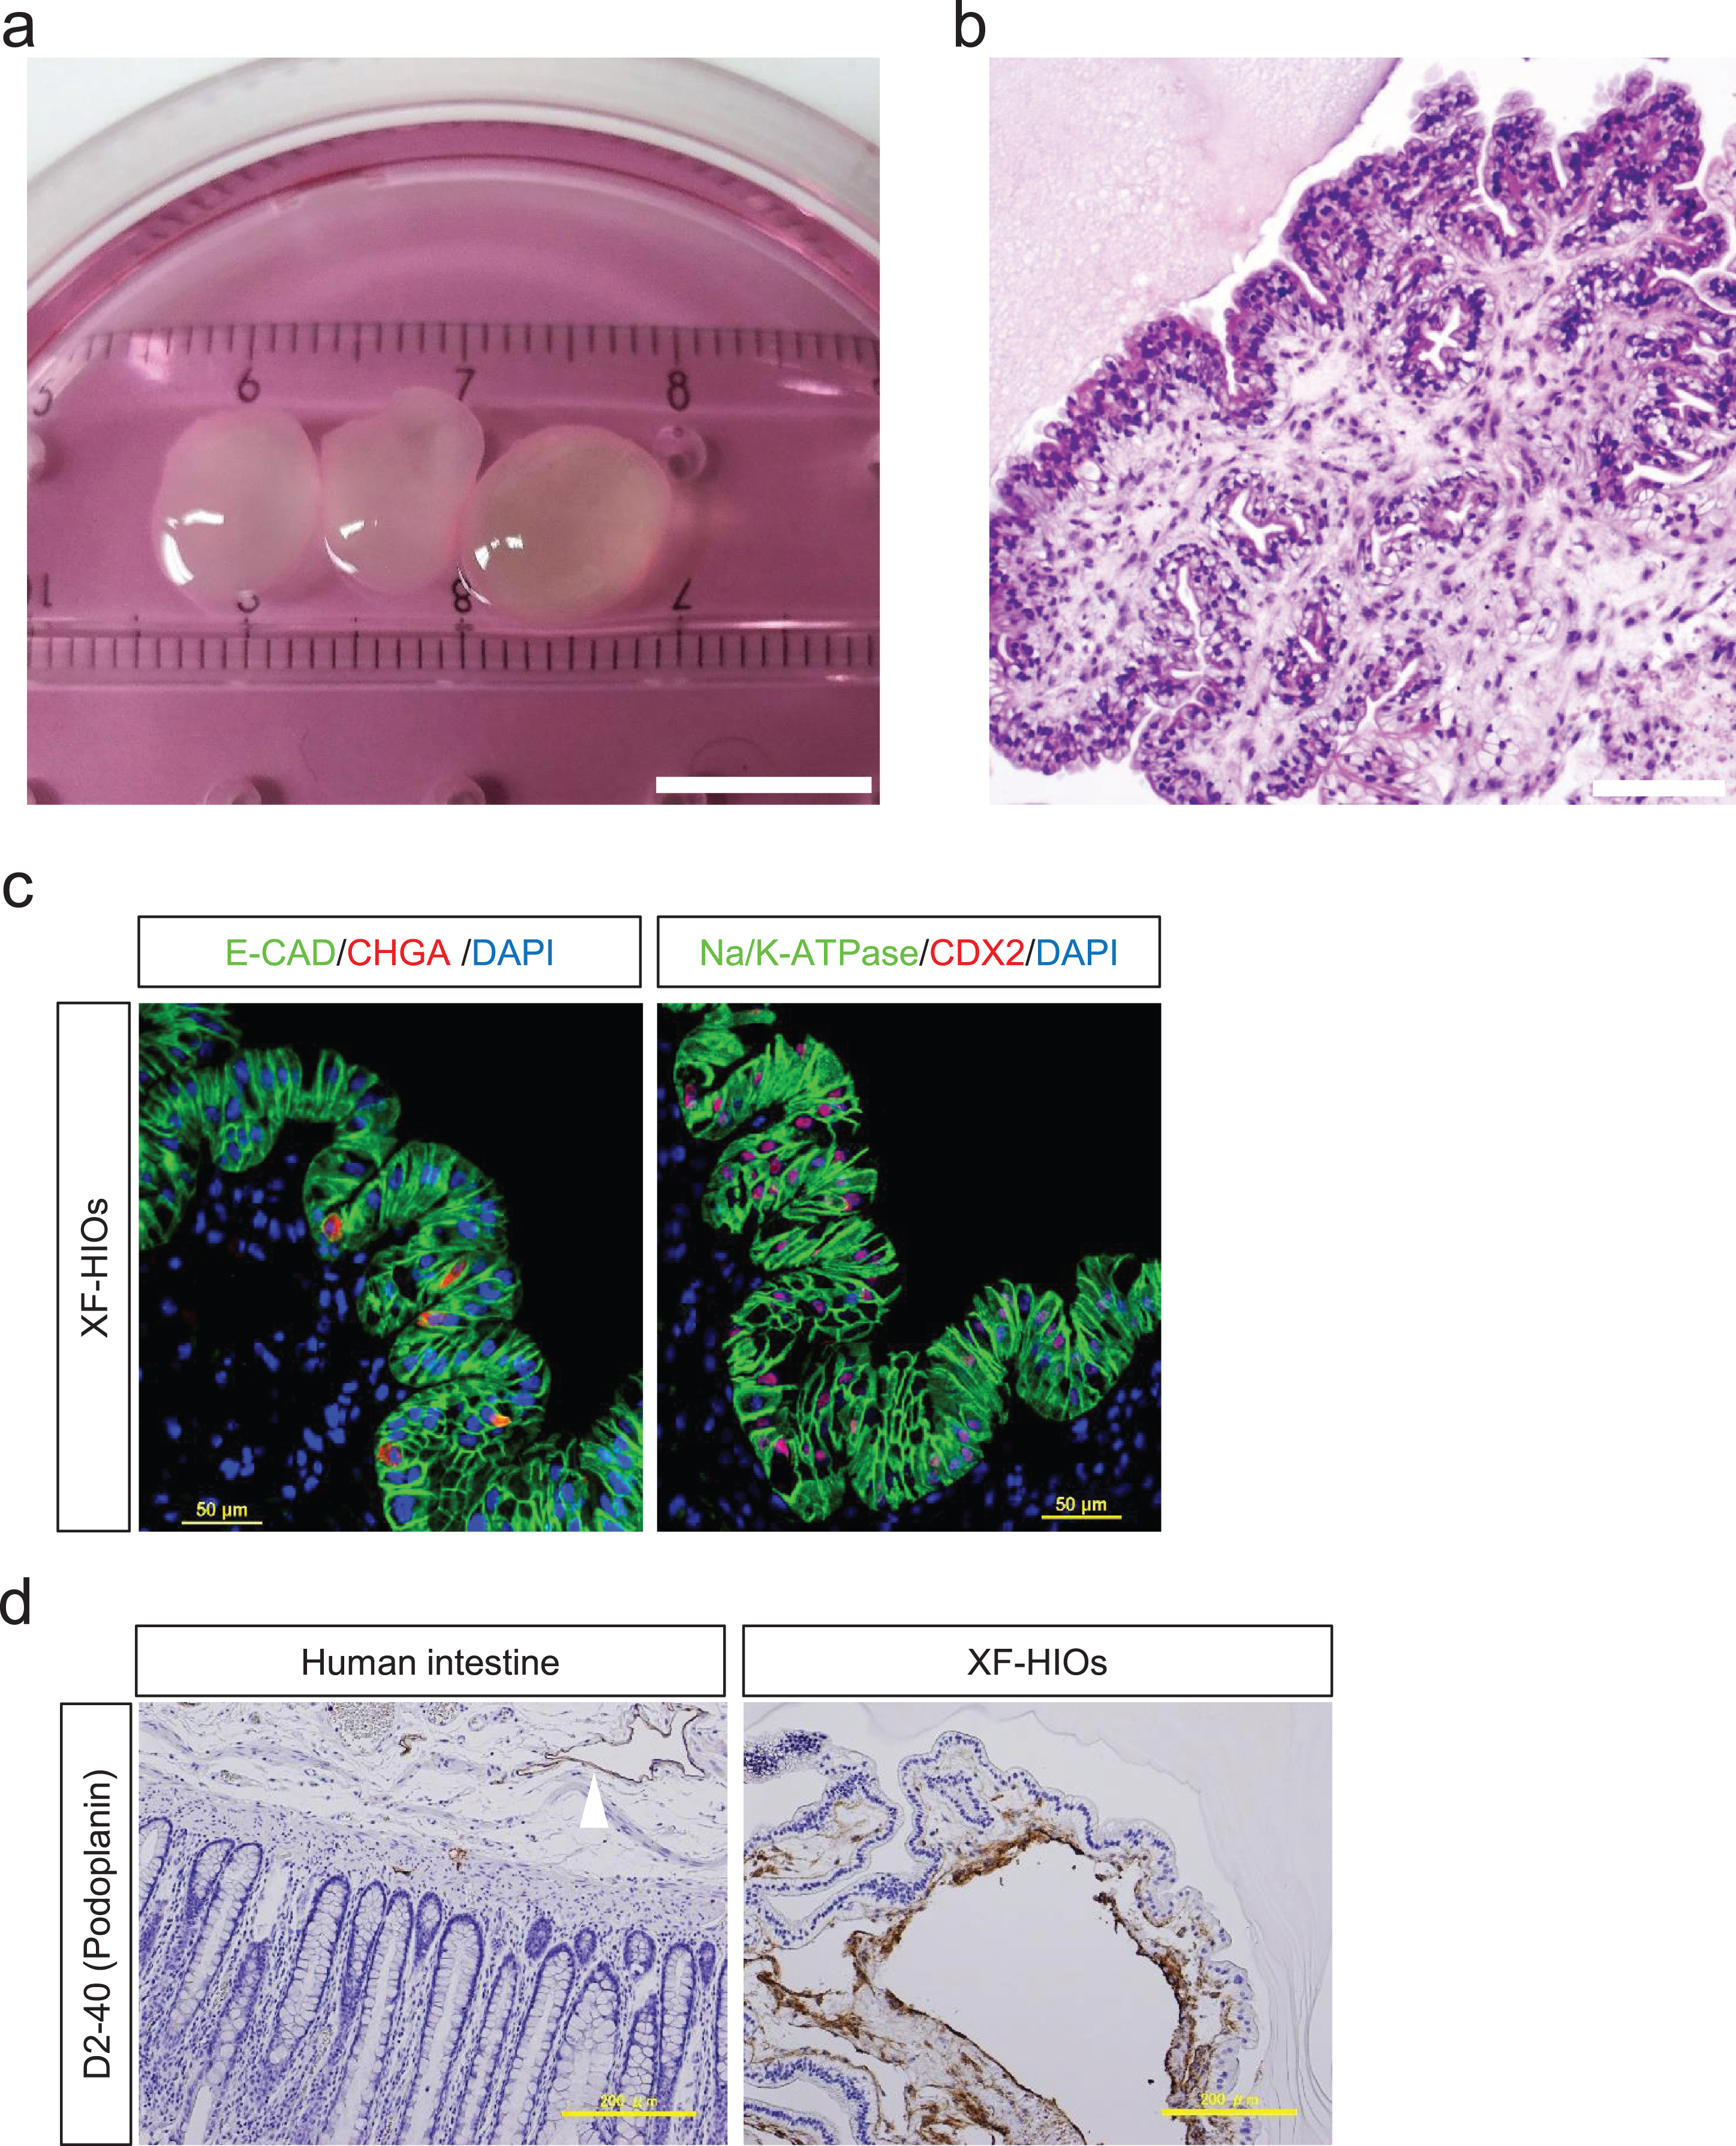 Characterization ofintestinal organoids from human embryonic stem cells. (a) In vitro culture of Xenogeneic-free human intestinal organoids (XF-HIOs) generated from hESCs. The XF-HIOs are stably maintained in a xenogeneic-free medium. Scale bar corresponds to 10 mm. (b) Hematoxylin and eosin (HE) staining of organoids on day 100. Scale bar corresponds to 200 μm. The XF-HIOs are structured outwards andoriented towards the epithelial layers. (c) Immunostaining for Chromogranin A (CHGA), caudal type homeobox 2 (CDX2), and Na/K-ATPase. Cell nuclei were counterstained with 4′,6-diamidino-2-phenylindole, dihydrochloride (DAPI). Scale bars correspond to 50 μm. (d) Under the epithelial layers of the XF-HIOs, cyst-like structures were lined with the lymphatic endothelial marker, D2-40 positive cells (Fig. 1d). Immunohistochemical staining for lymphatic endothelium marker Podoplanin (D2-40) in XF-HIOs and in healthy adult human intestine (white arrowhead) as control. Cystic structures of the XF-HIOs lined by D2-40 positive cells. Scale bars correspond to 200 μm.